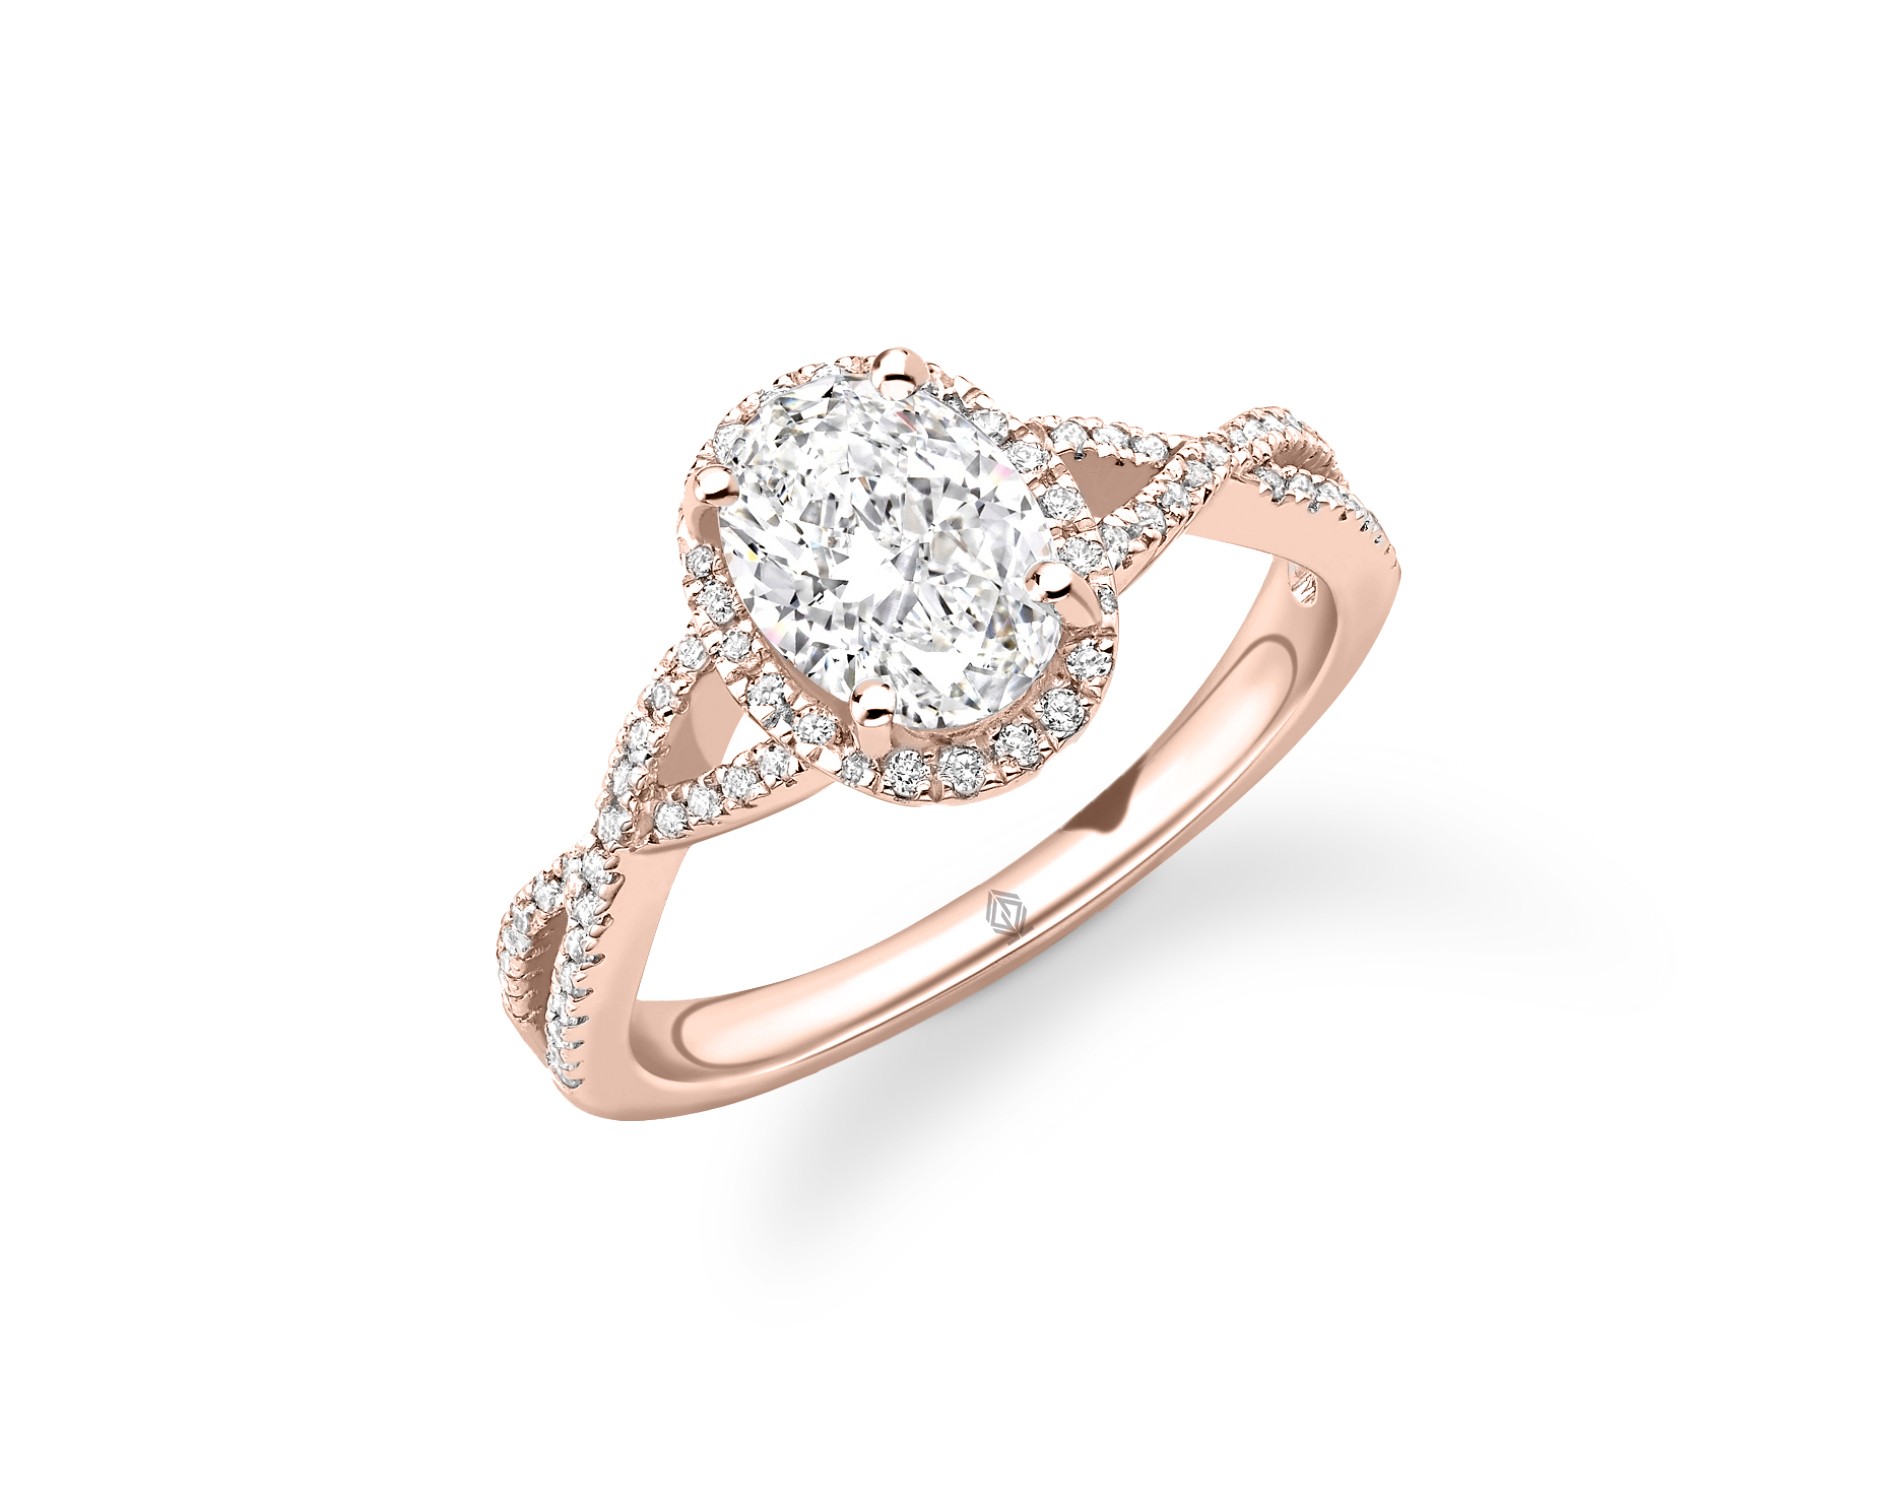 18K ROSE GOLD OVAL CUT HALO DIAMOND ENGAGEMENT RING WITH TWISTED SHANK